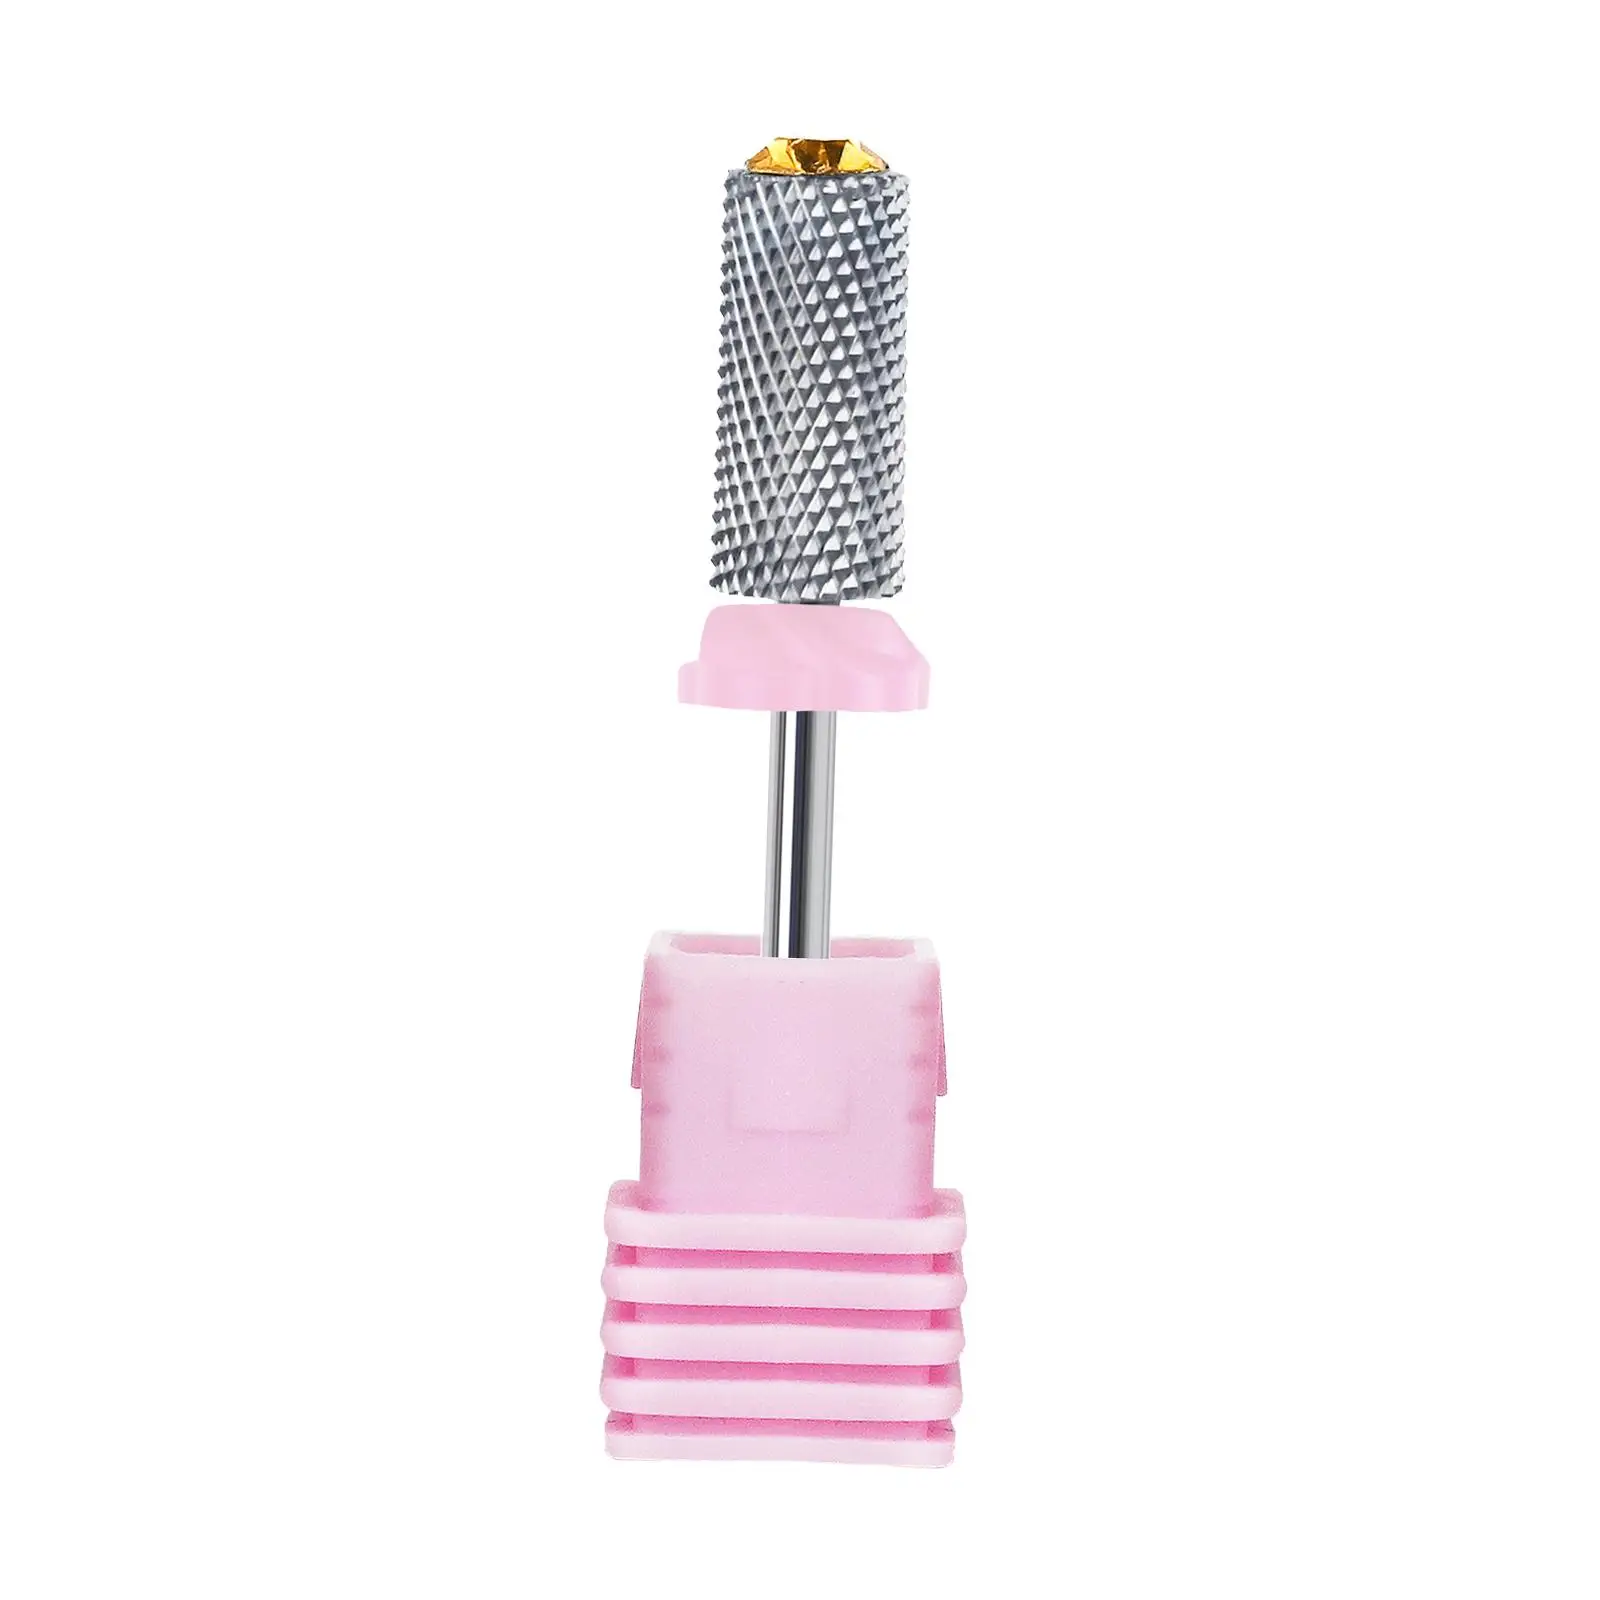 Nail Drill Bit Accessories Electric Nail File Bit Manicure Pedicure Tool Rotary Burrs Cuticle Remover Bit for Acrylic Gel Nails